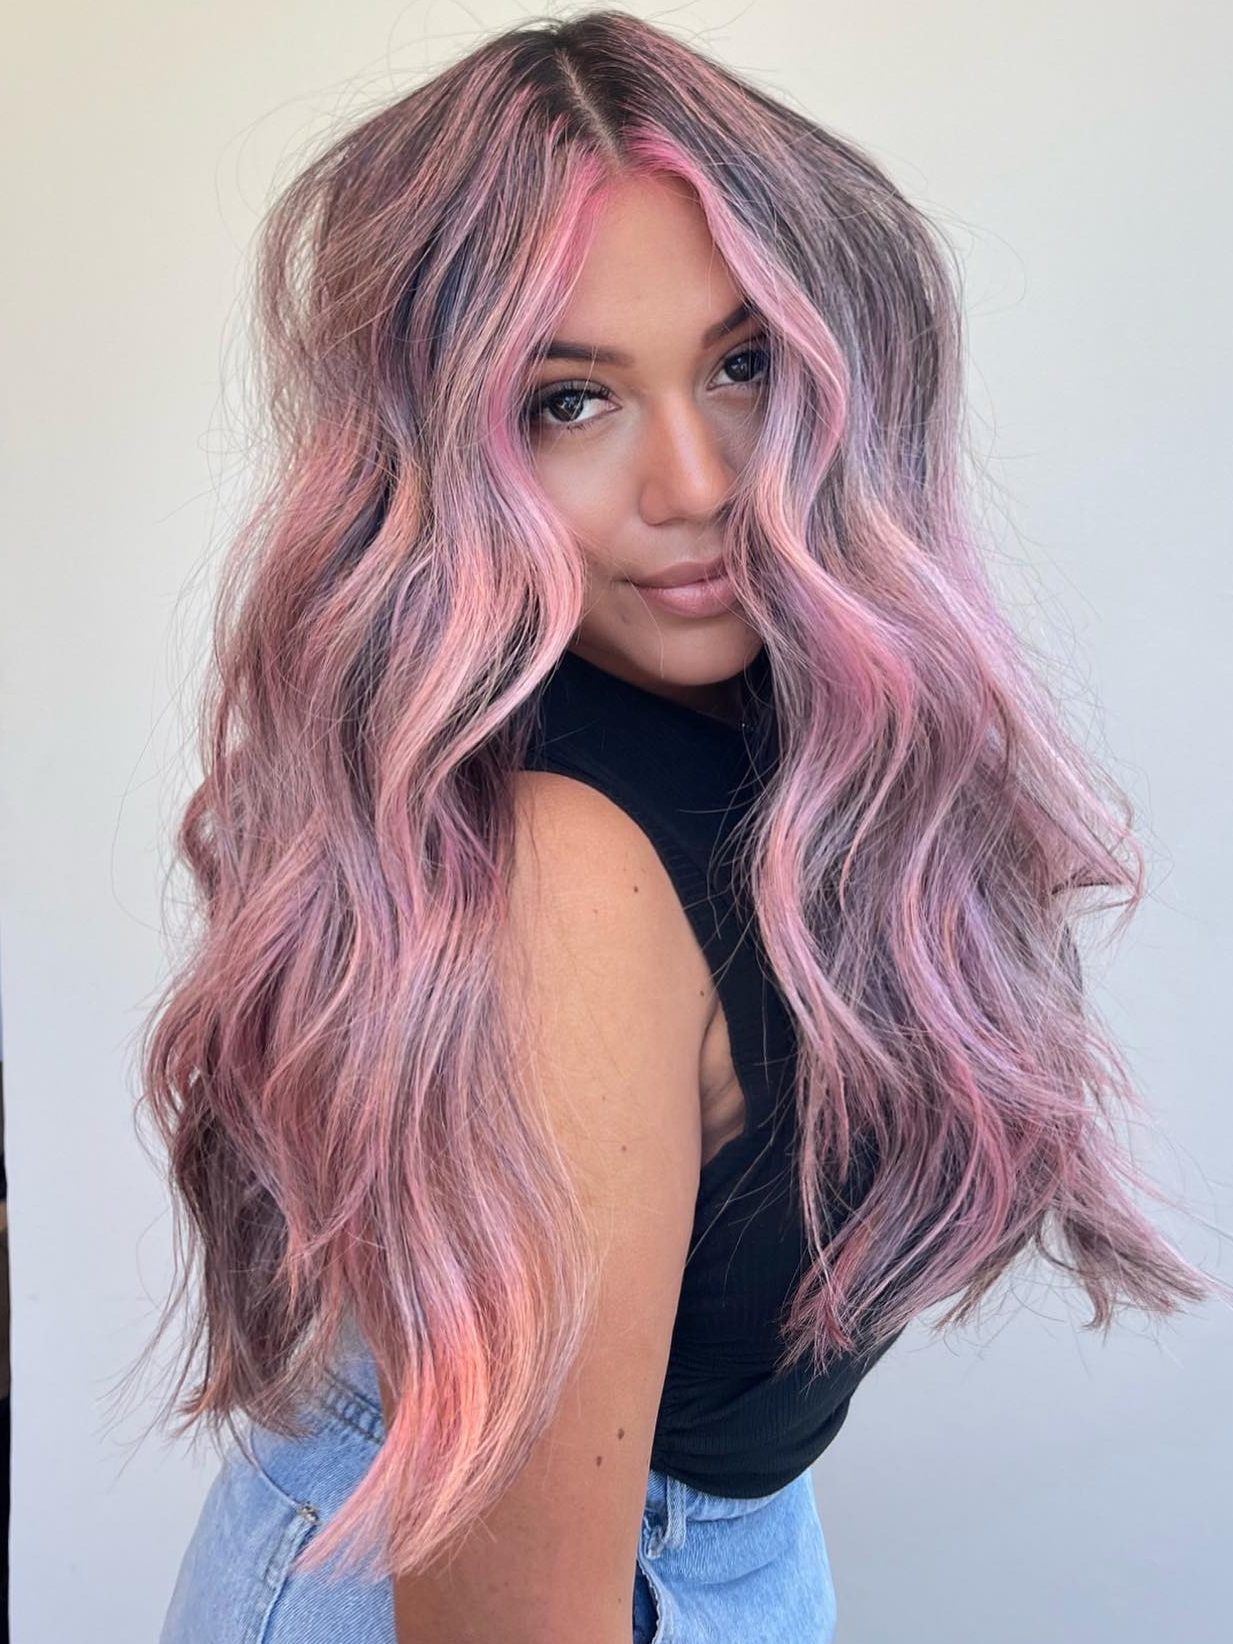 Long Gray Hair with Pink Highlights